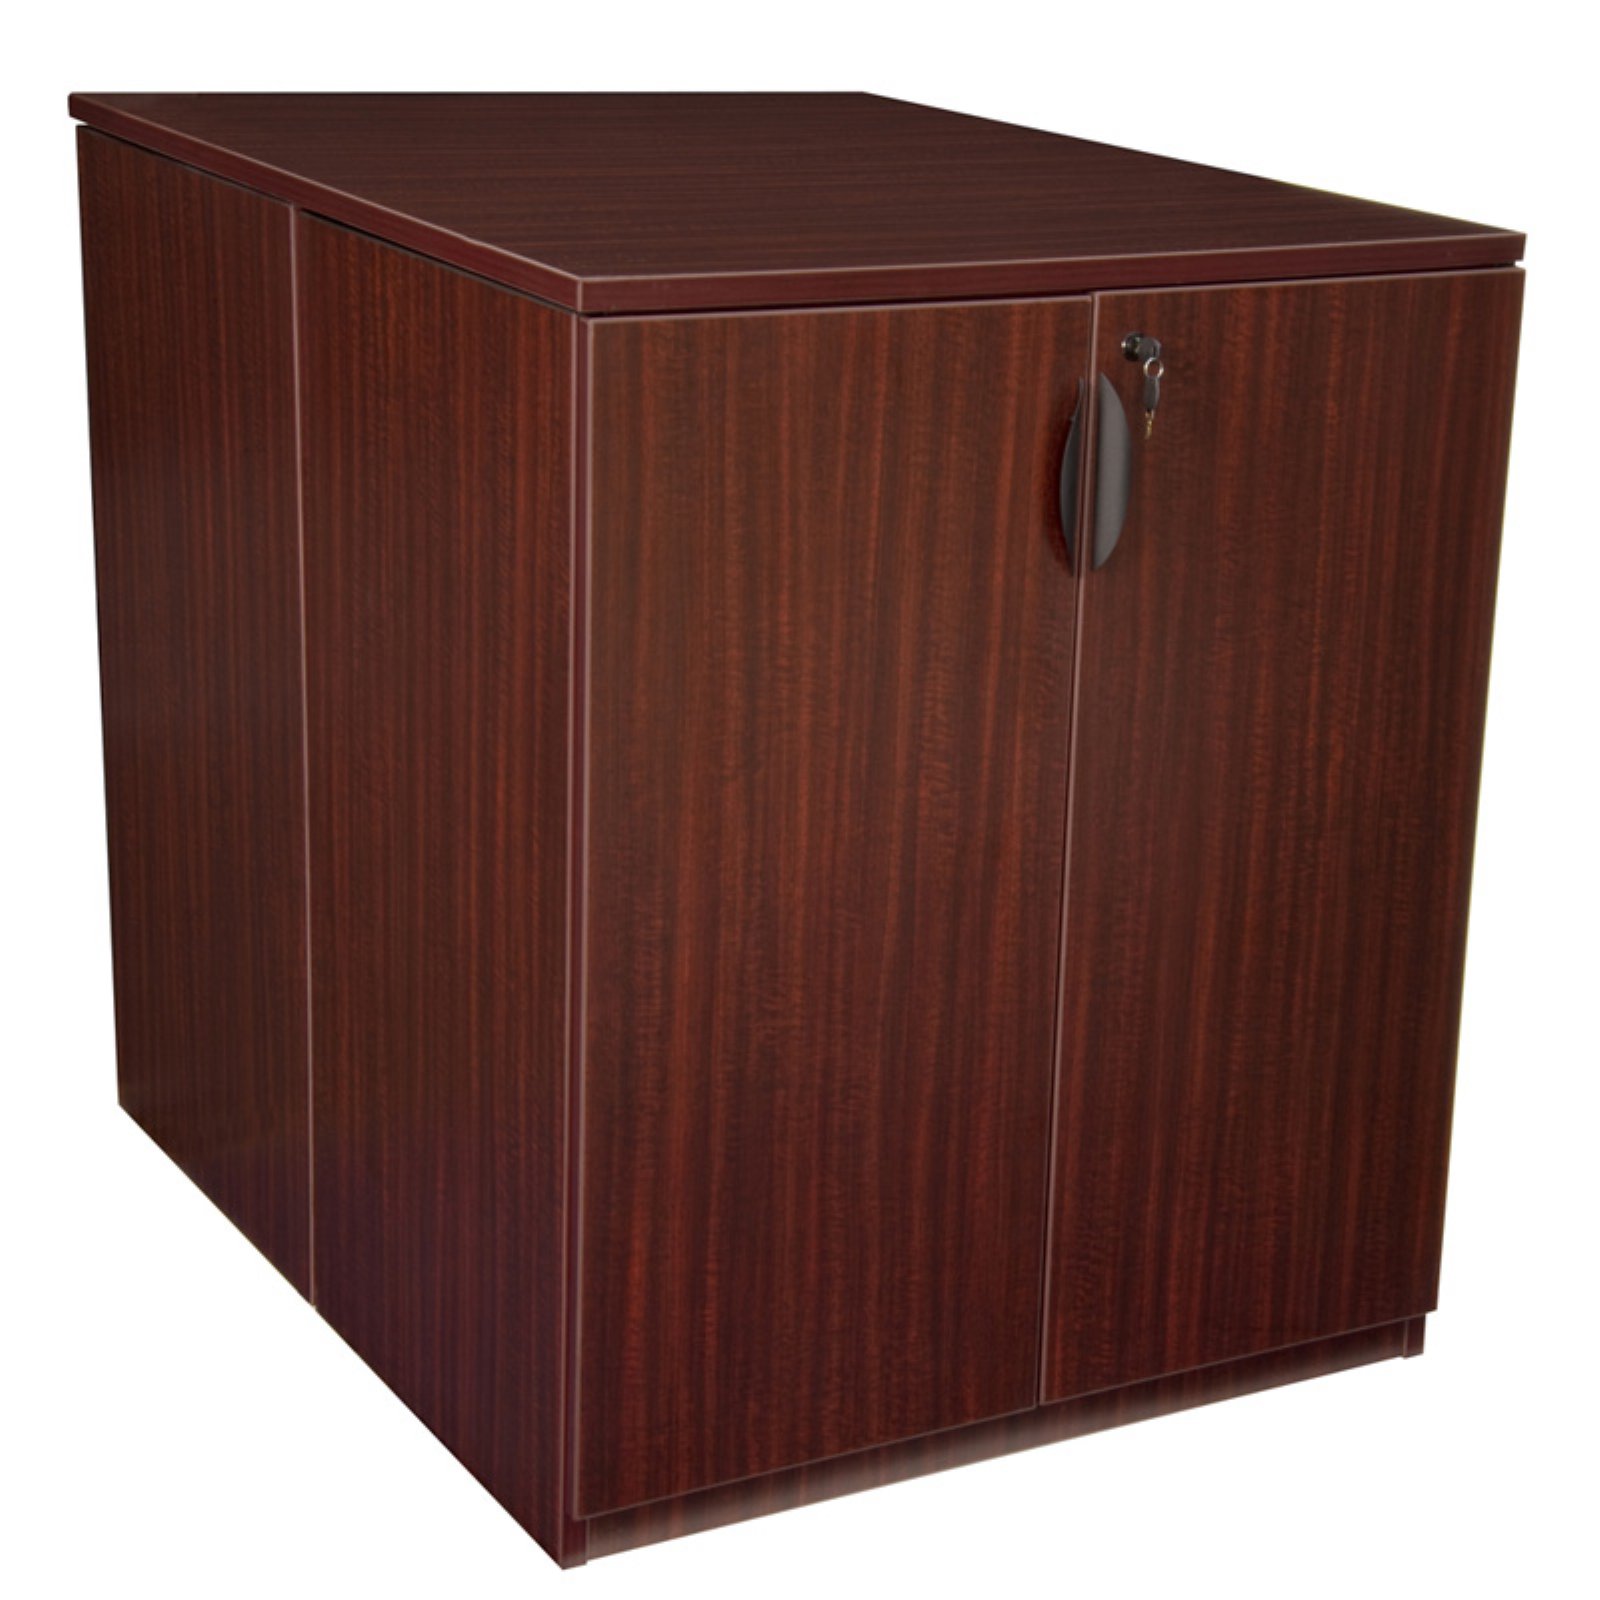 Regency Legacy Stand Up Back to Back Storage Cabinet/ Lateral File- Mahogany - image 1 of 2